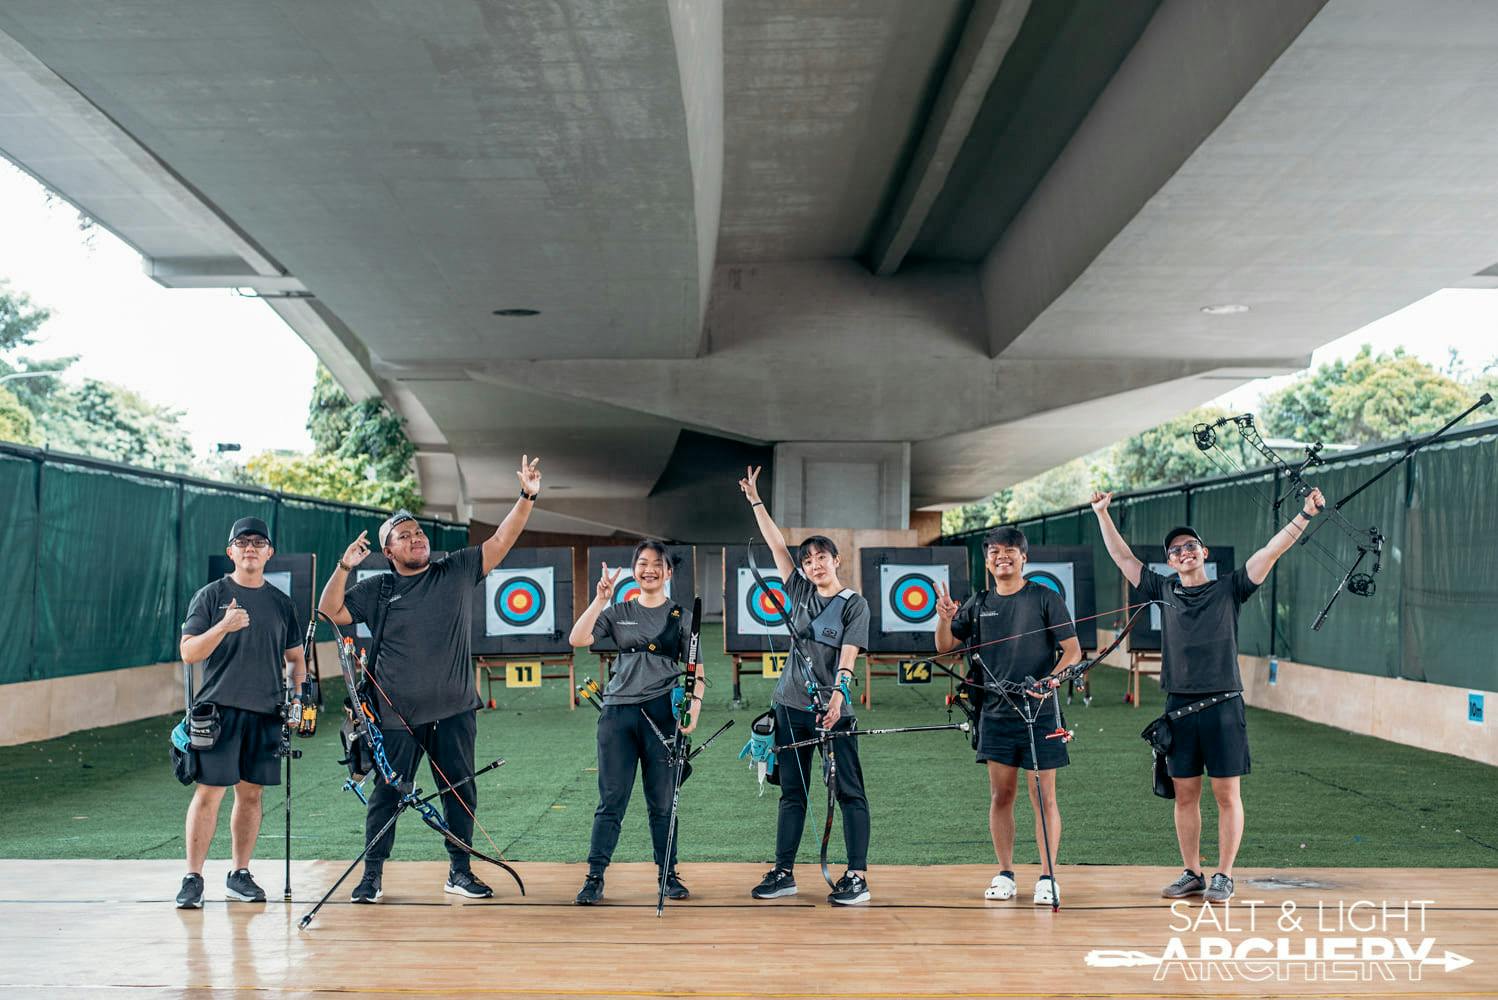 Learn the art of archery and compete with your team